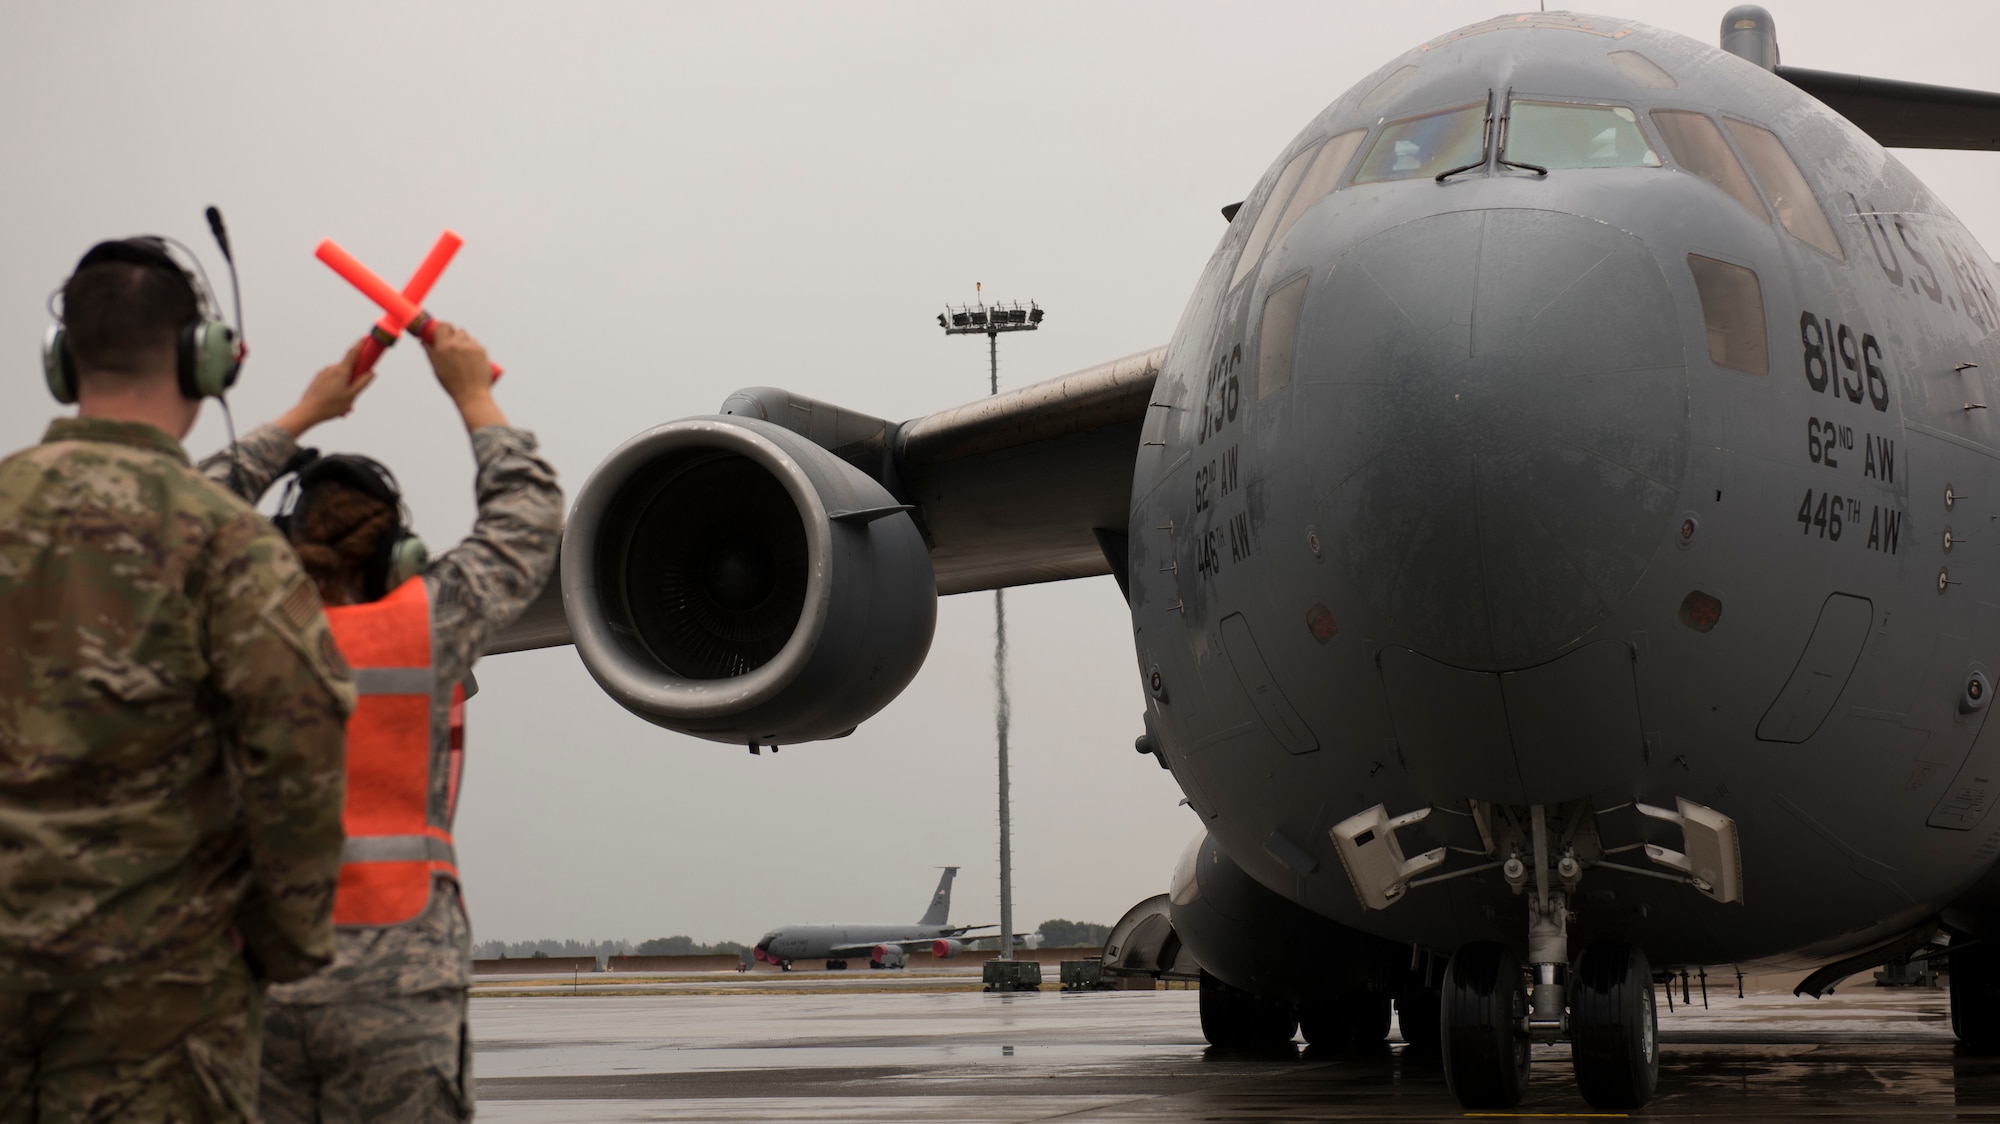 Senior Airman Ciana Jones, 62nd Maintenance Squadron crew chief, directs a C-17 Globemaster to a parking spot at the start of Air Mobility Command’s Mobility Guardian 2019 exercise at Fairchild Air Force Base, Washington, Sept. 8, 2019. Exercise Mobility Guardian is AMC’s premier, large-scale mobility exercise during which more than 2,500 Air Mobility Airmen will participate. (U.S. Air Force photo by Senior Airman Ryan Lackey)